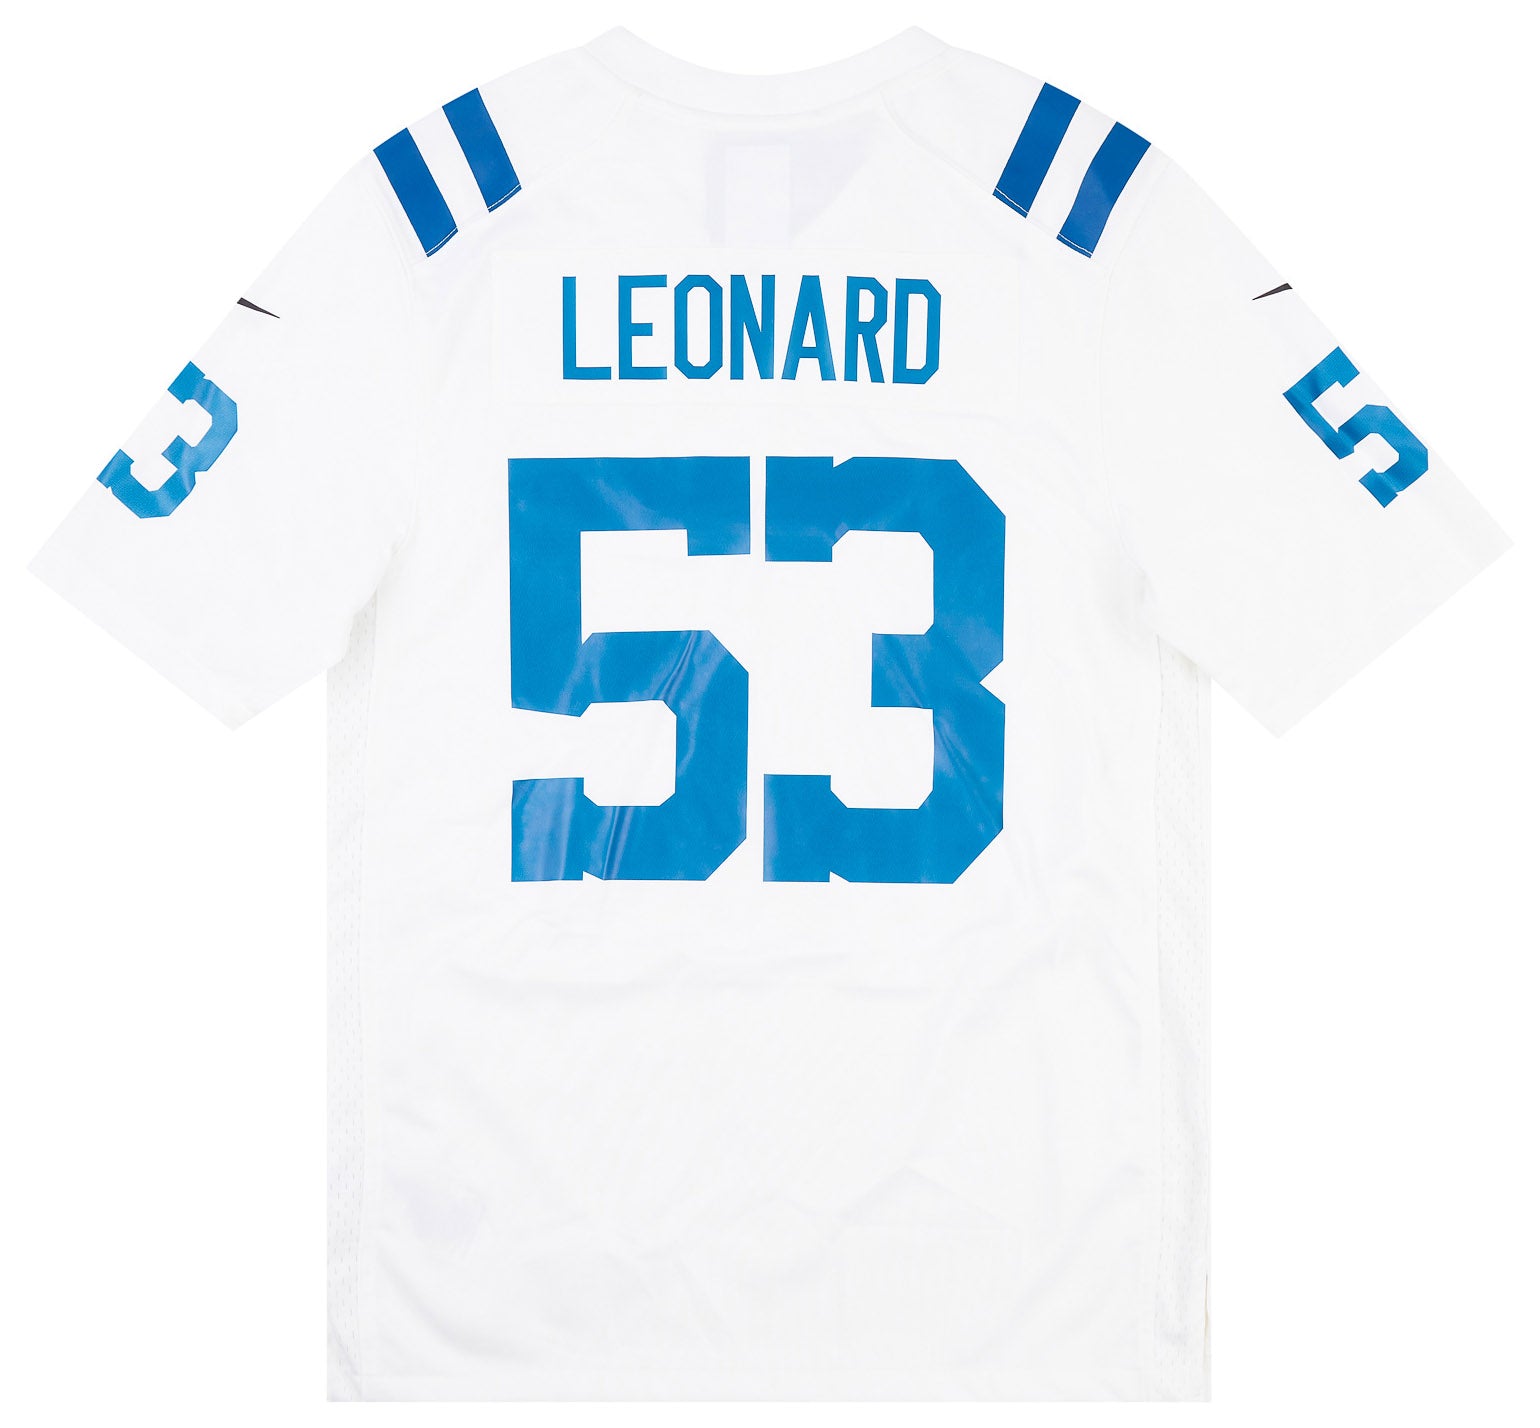 2020-22 INDIANAPOLIS COLTS LEONARD #53 NIKE GAME JERSEY (AWAY) S - W/TAGS